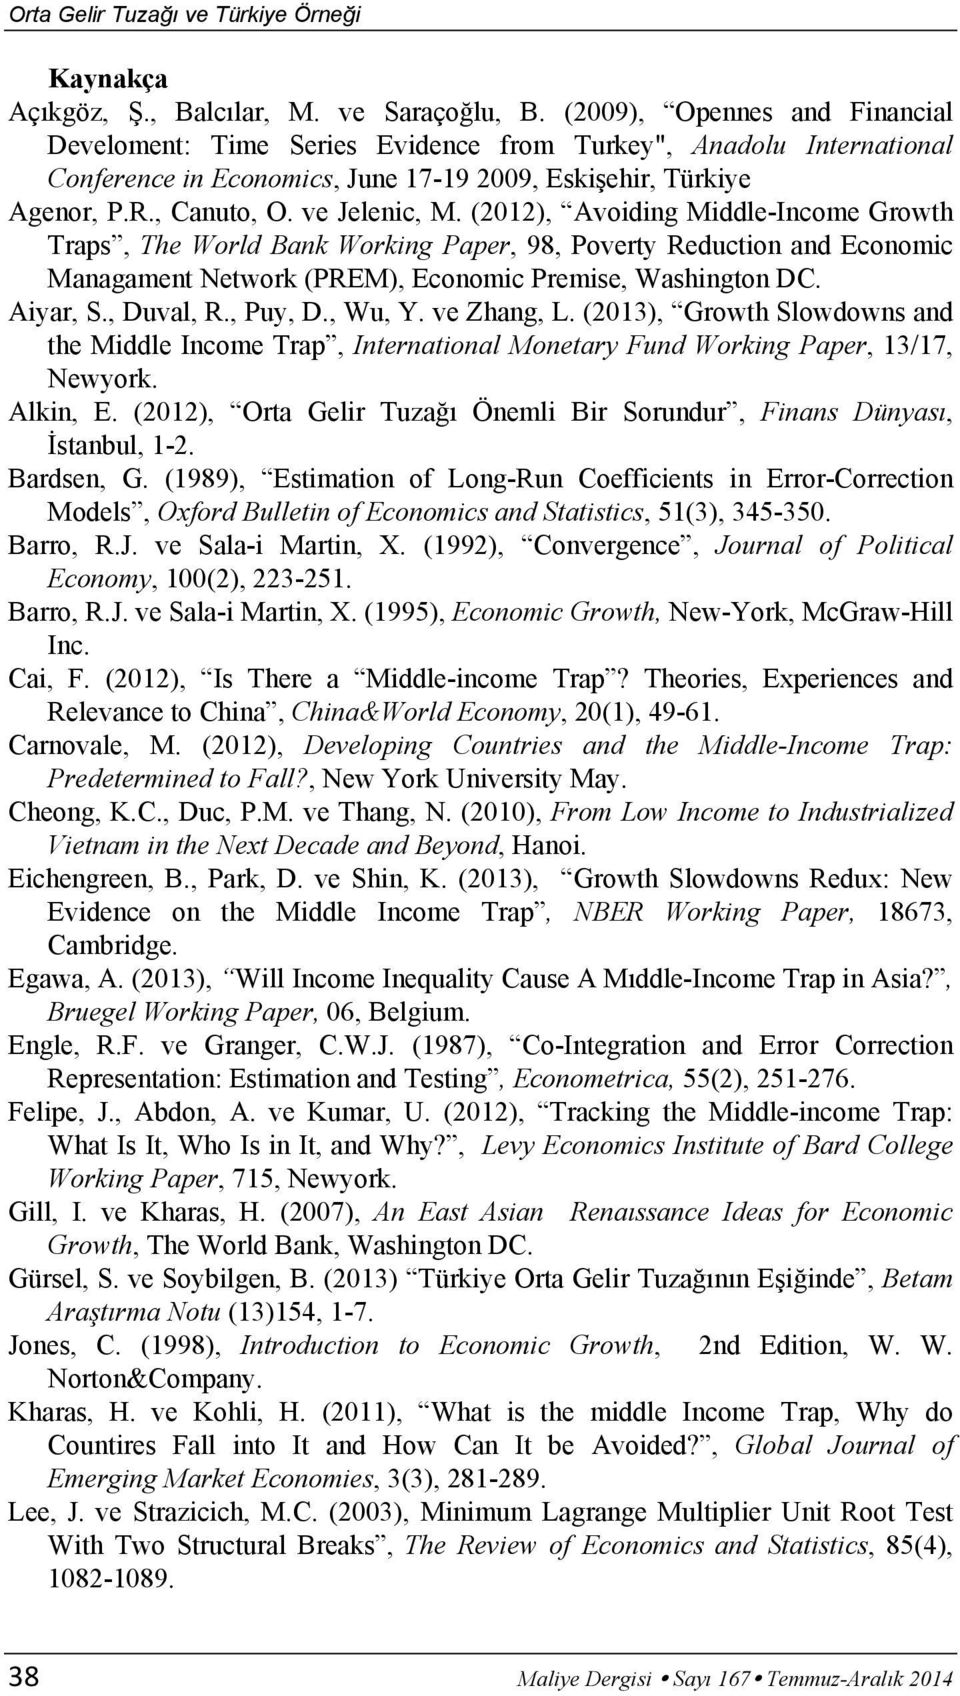 (2012), Avoiding Middle-Income Growth Traps, The World Bank Working Paper, 98, Poverty Reduction and Economic Managament Network (PREM), Economic Premise, Washington DC. Aiyar, S., Duval, R., Puy, D.